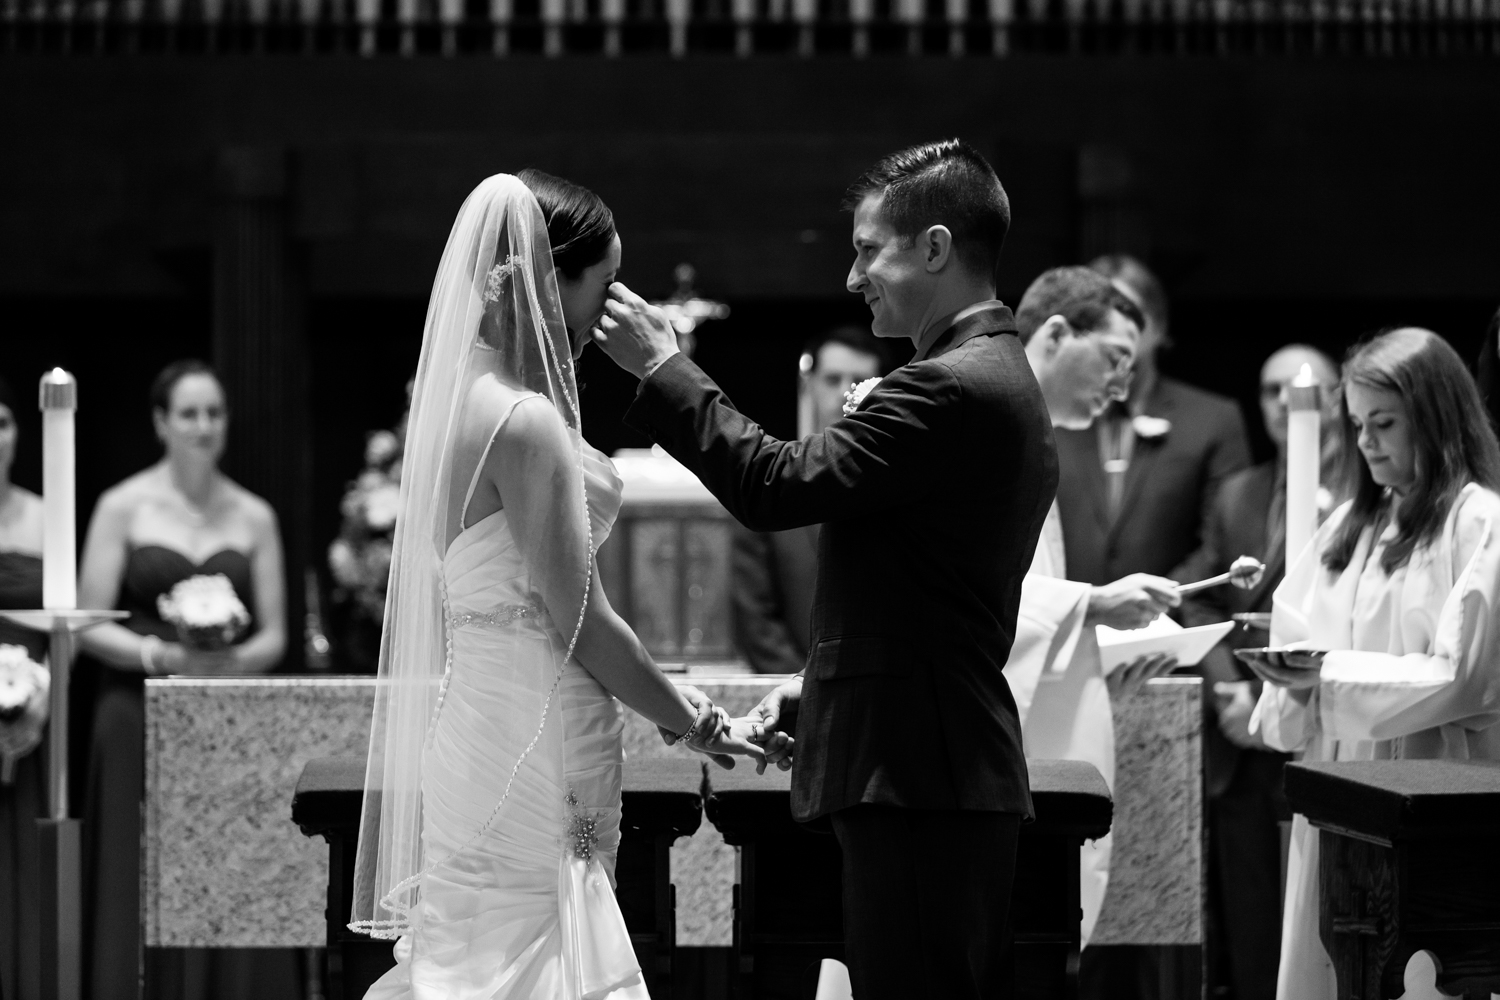  A groom wipes away a tear during the wedding ceremony 